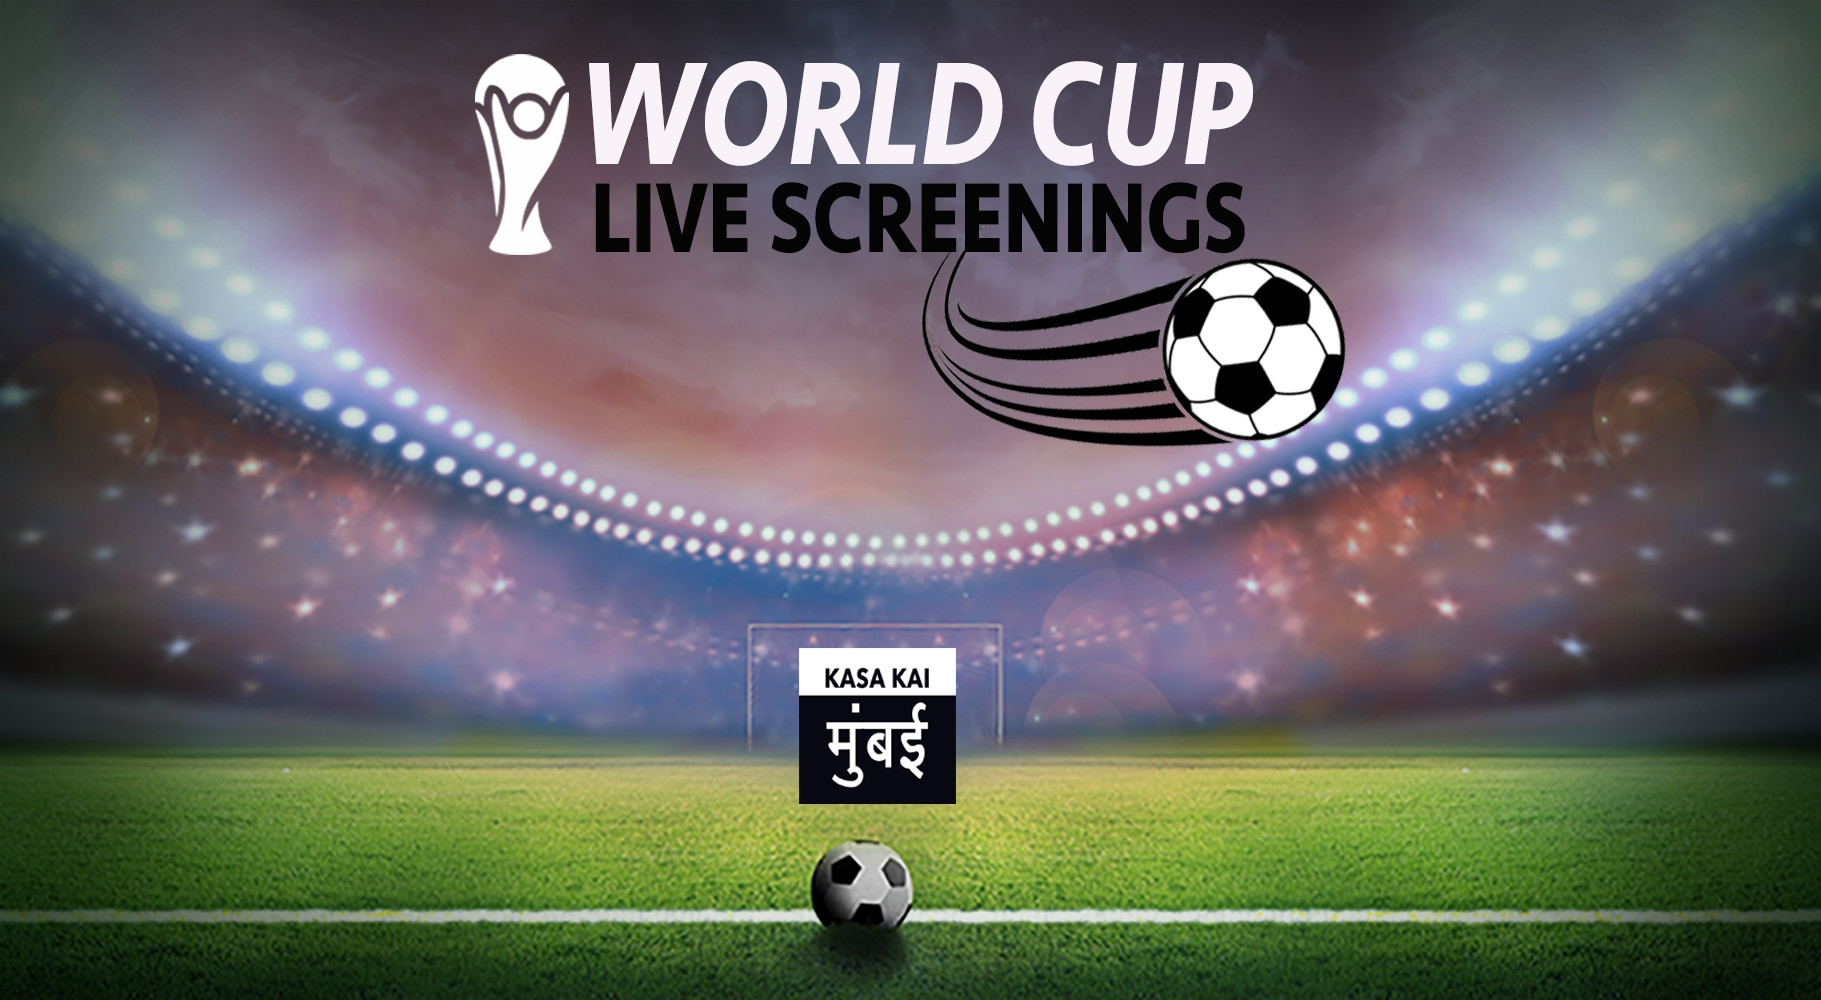 Book tickets to Football World Cup Live Screenings Pool Cafe, Chennai